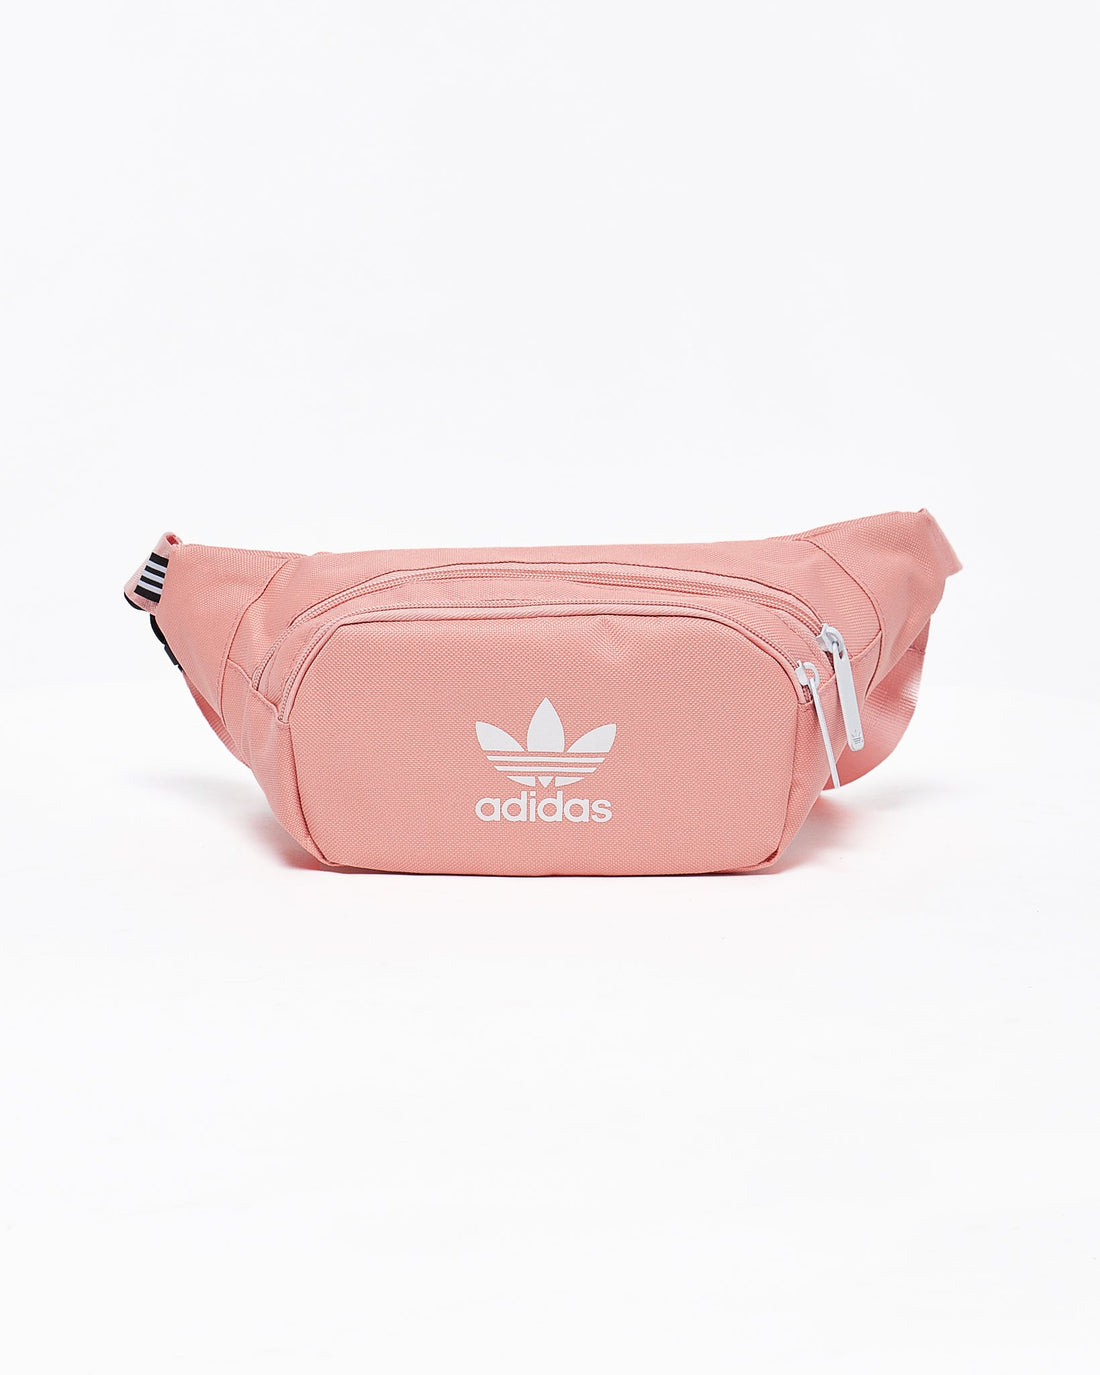 MOI OUTFIT-AD Logo Printed Unisex Bumbag 14.90